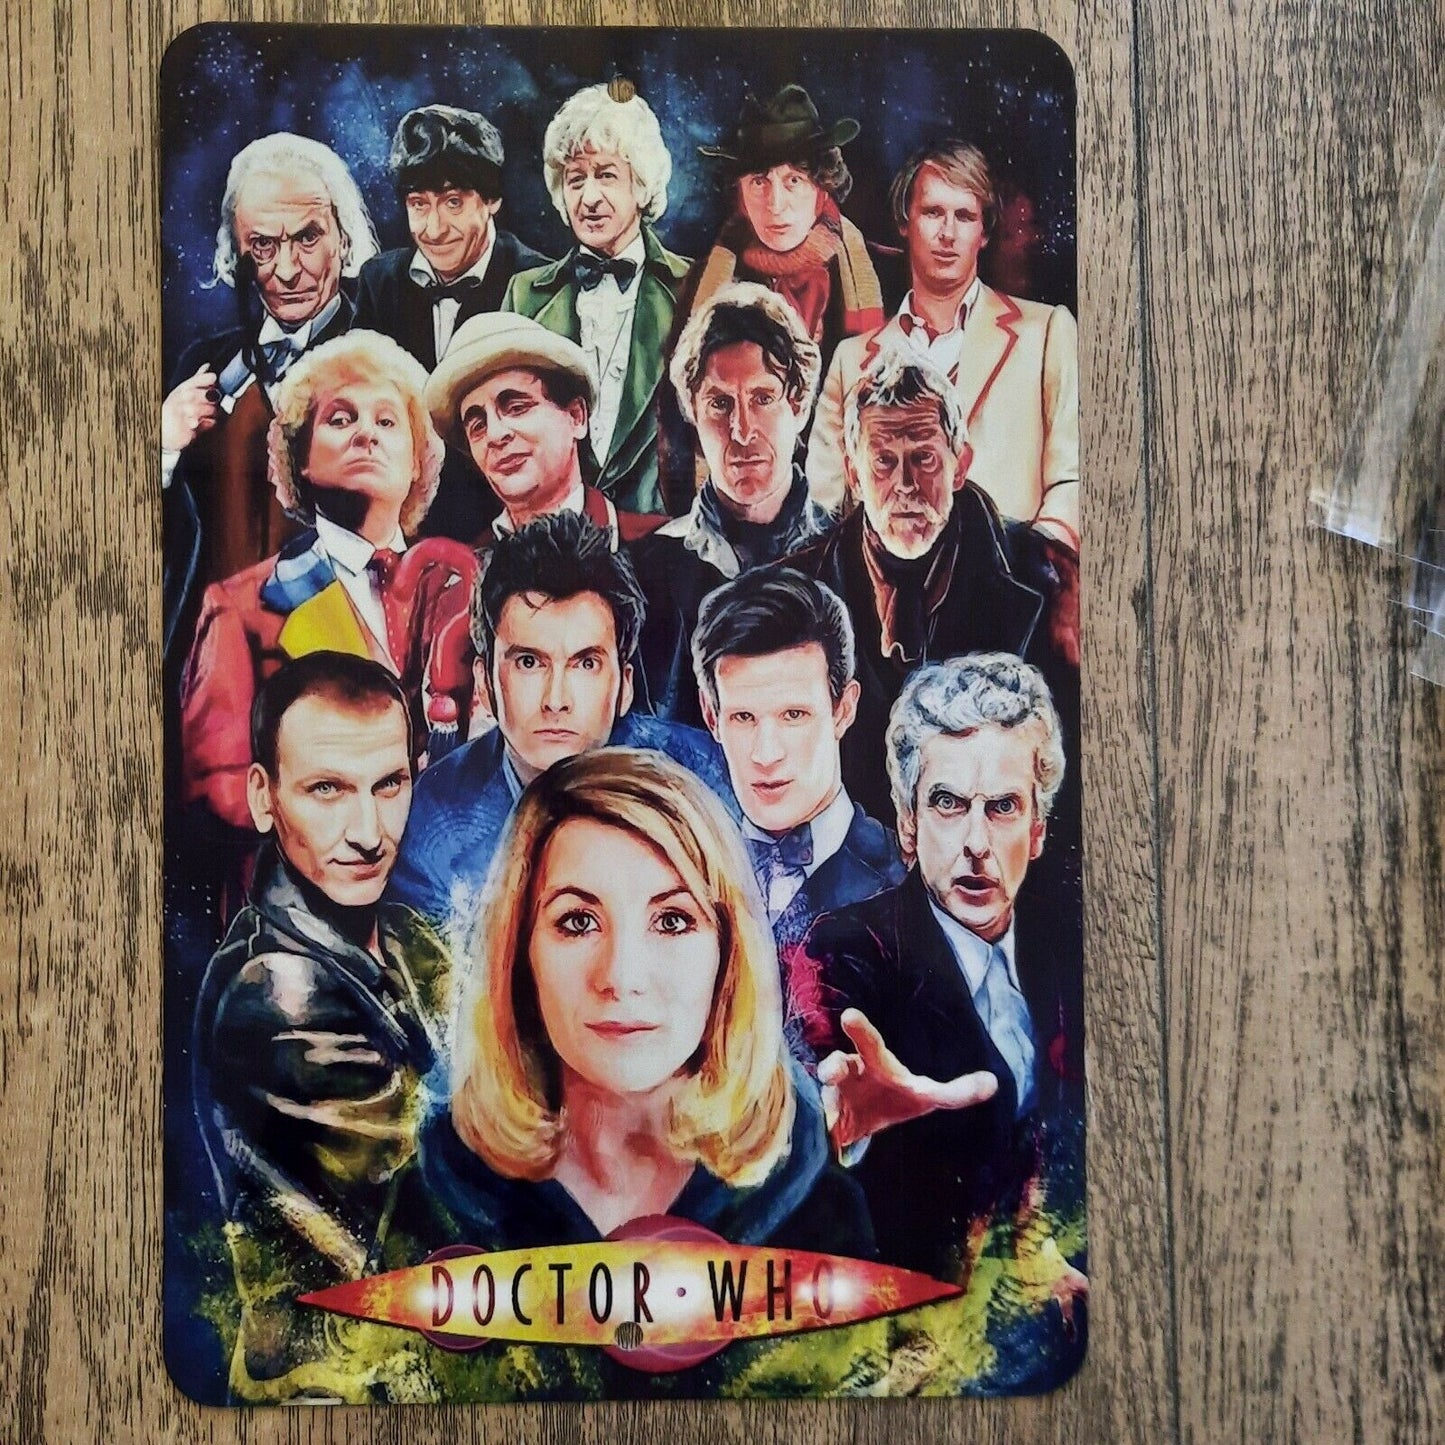 Dr Who SCi-Fi TV Show 8x12 Metal Wall Sign Movie